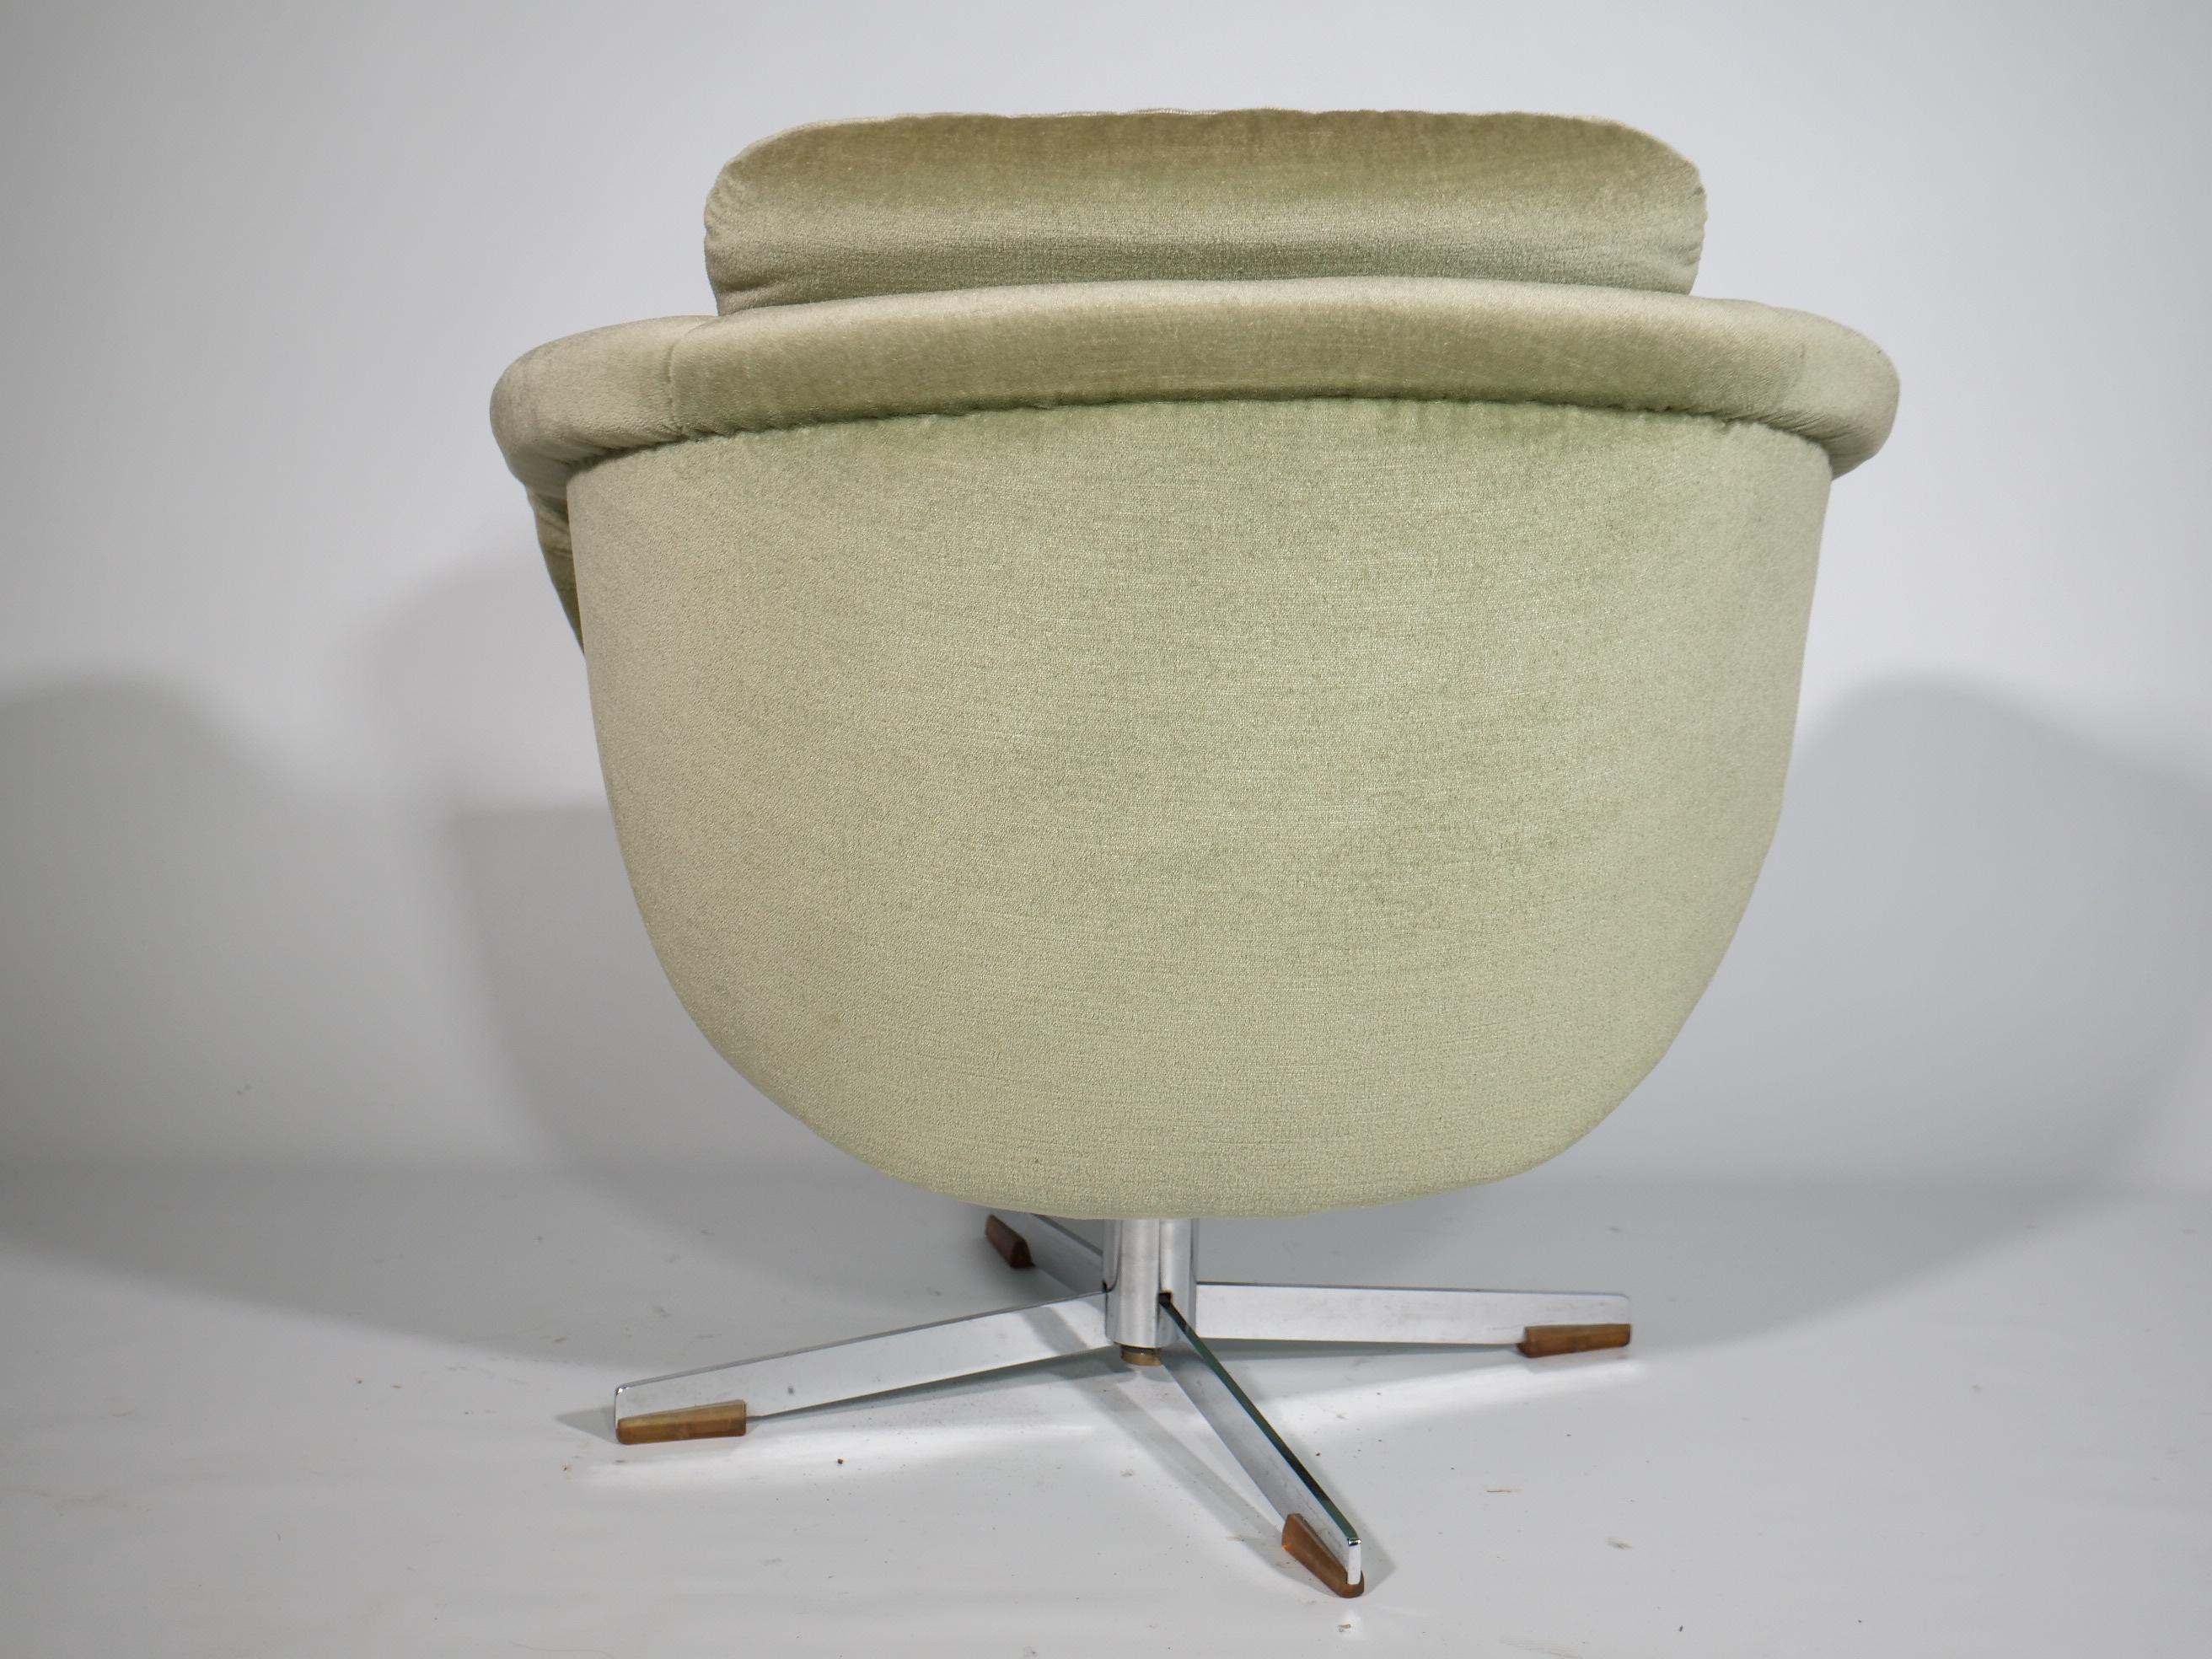 Space Age Lounge Sessel Mid Century Modern Drehsessel aus Velours 1970er In Good Condition For Sale In Mainz, DE